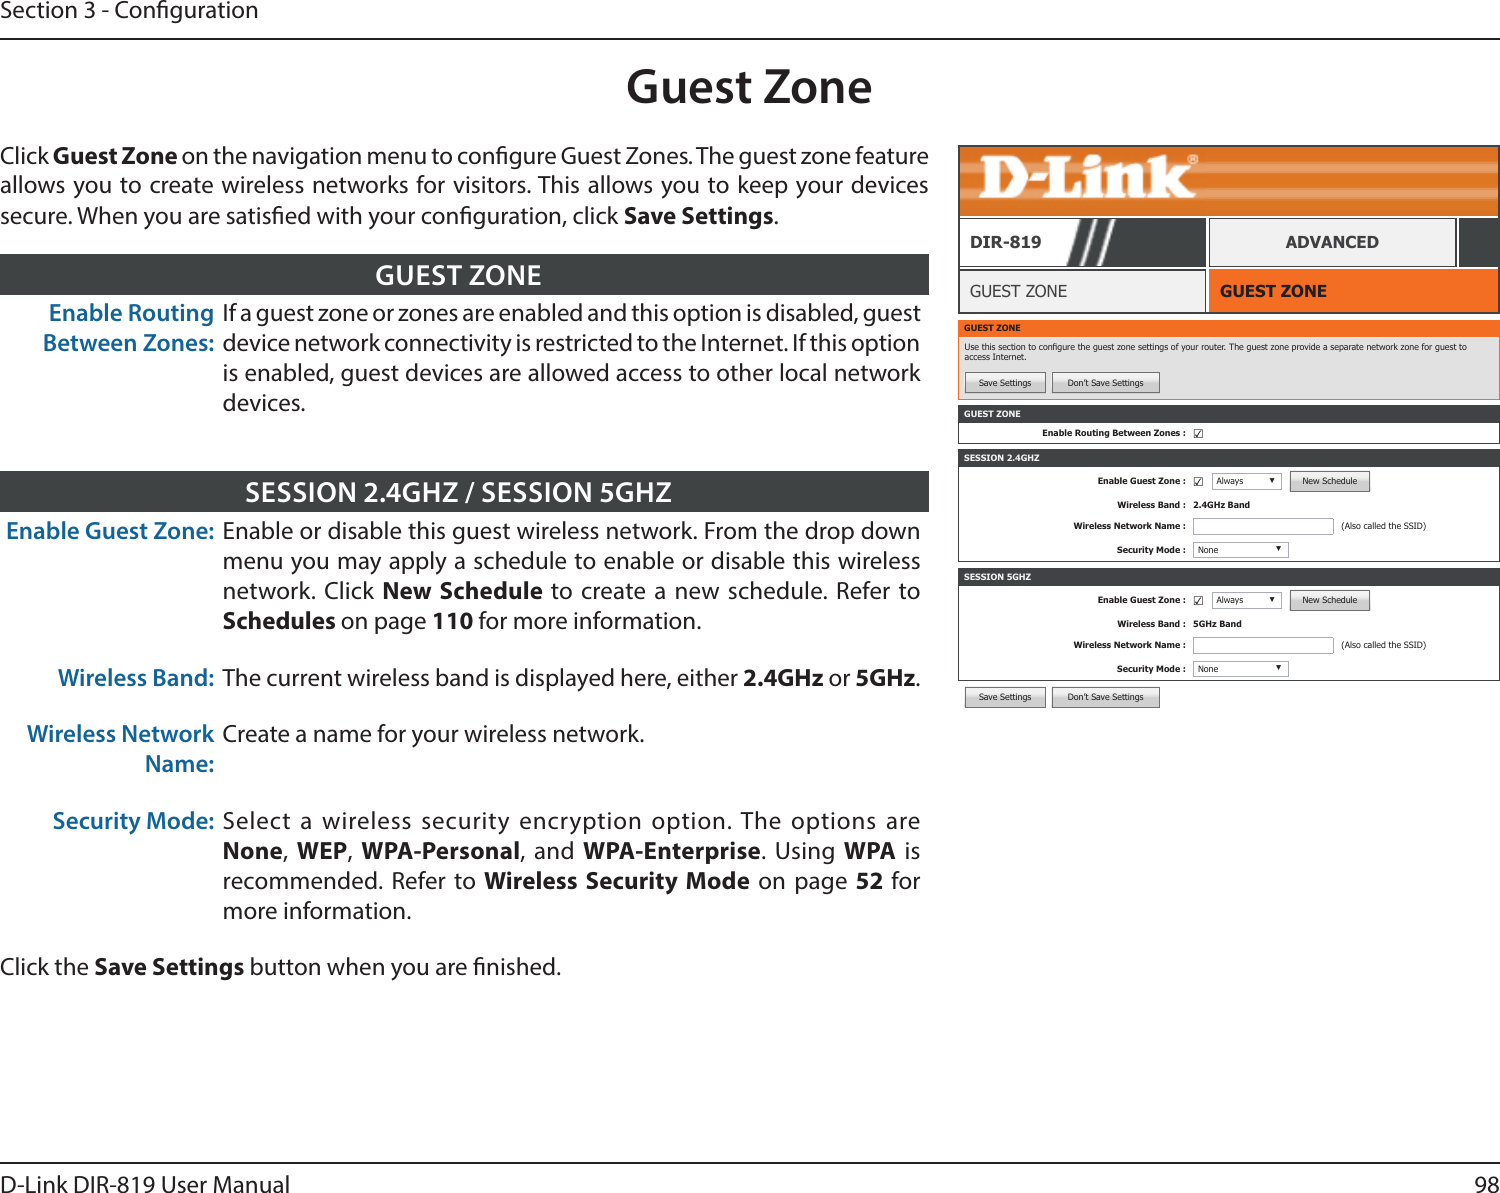 98D-Link DIR-819 User ManualSection 3 - CongurationSave Settings Don’t Save SettingsGuest ZoneGUEST ZONEGUEST ZONEDIR-819 ADVANCEDClick Guest Zone on the navigation menu to congure Guest Zones. The guest zone feature allows you to create wireless networks for visitors. This allows you to keep your devices secure. When you are satised with your conguration, click Save Settings.Enable Routing Between Zones:If a guest zone or zones are enabled and this option is disabled, guest device network connectivity is restricted to the Internet. If this option is enabled, guest devices are allowed access to other local network devices.GUEST ZONEEnable Guest Zone: Enable or disable this guest wireless network. From the drop down menu you may apply a schedule to enable or disable this wireless network. Click New Schedule to create a new schedule. Refer to Schedules on page 110 for more information.Wireless Band: The current wireless band is displayed here, either 2.4GHz or 5GHz.Wireless Network Name:Create a name for your wireless network.Security Mode: Select a wireless security encryption option. The options are None, WEP,  WPA-Personal, and WPA-Enterprise. Using WPA is recommended. Refer to Wireless Security Mode on page 52 for more information.Click the Save Settings button when you are nished.SESSION 2.4GHZ / SESSION 5GHZGUEST ZONEUse this section to congure the guest zone settings of your router. The guest zone provide a separate network zone for guest to access Internet.Save Settings Don’t Save SettingsSESSION 2.4GHZEnable Guest Zone : ☑Always ▼New ScheduleWireless Band : 2.4GHz BandWireless Network Name : (Also called the SSID)Security Mode : None ▼SESSION 5GHZEnable Guest Zone : ☑Always ▼New ScheduleWireless Band : 5GHz BandWireless Network Name : (Also called the SSID)Security Mode : None ▼GUEST ZONEEnable Routing Between Zones : ☑